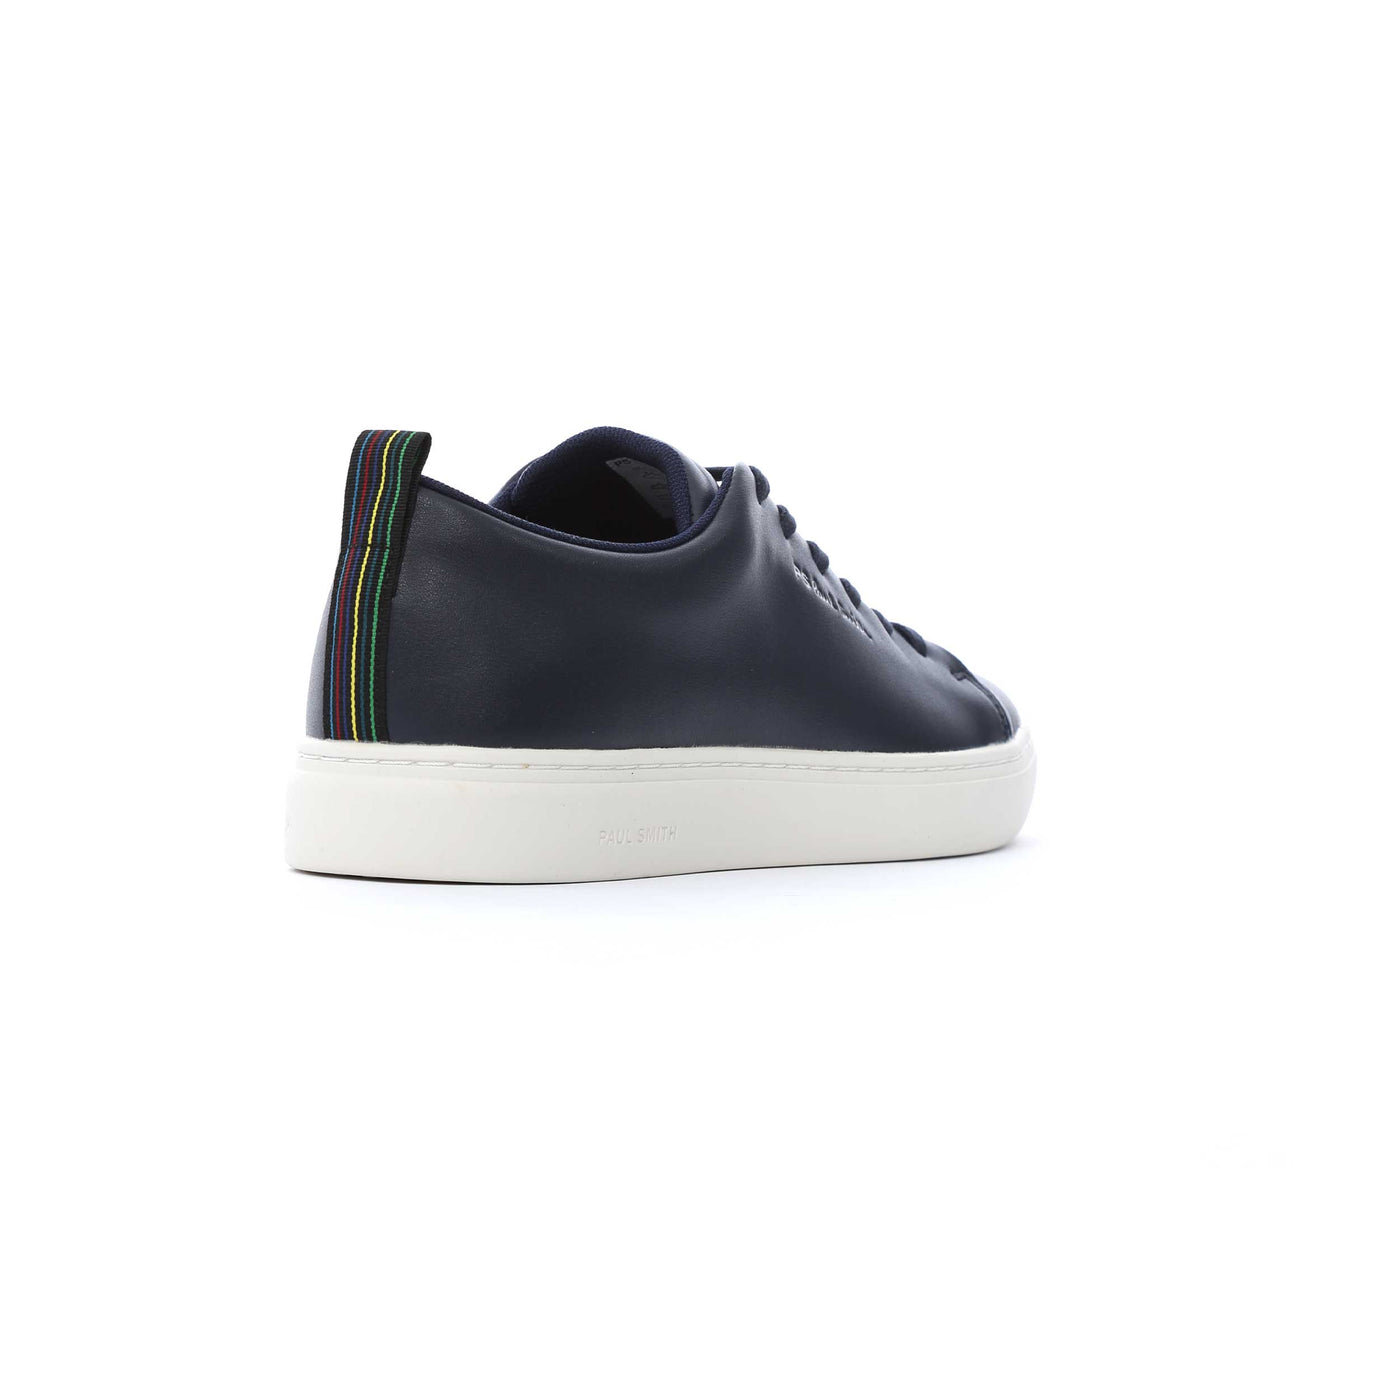 Paul Smith Lee Trainer in Navy